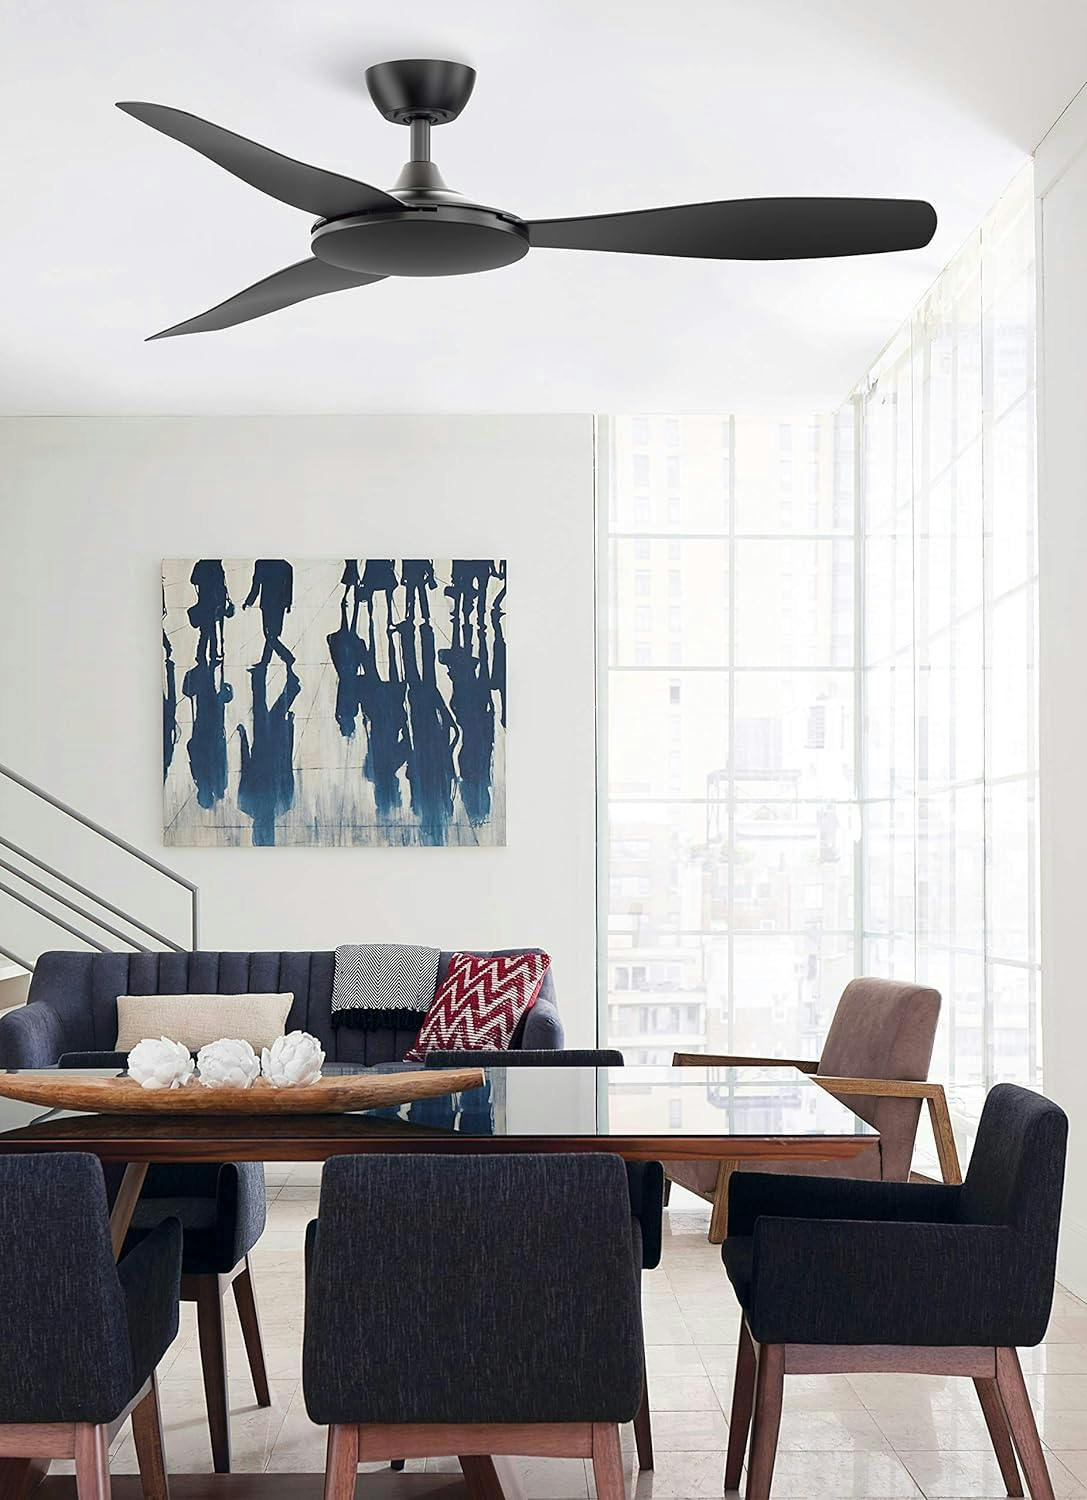 GlideAire 52" Smart Black Composite Blade Ceiling Fan with Remote